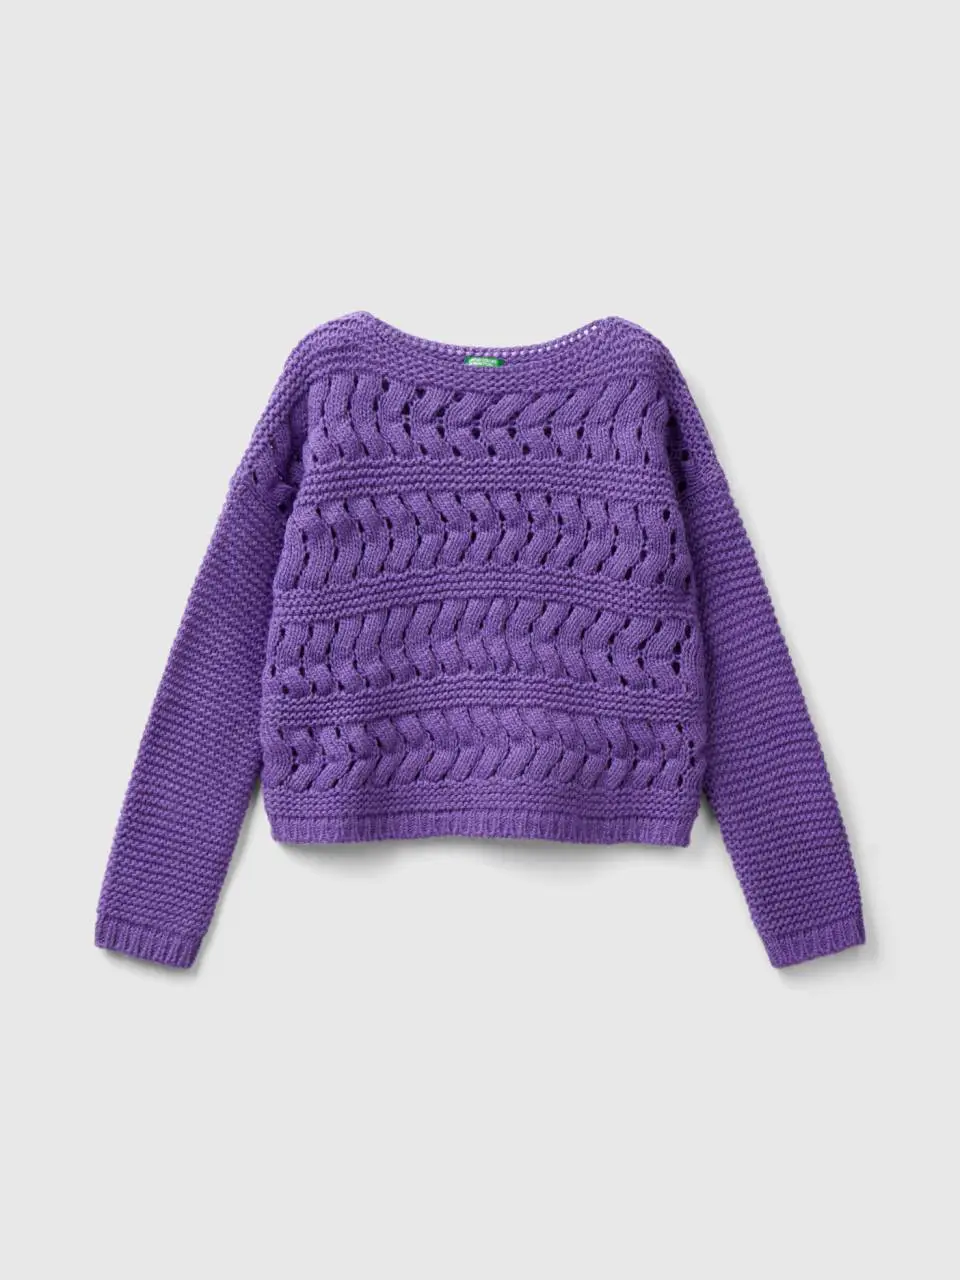 Benetton cable knit sweater in wool blend. 1